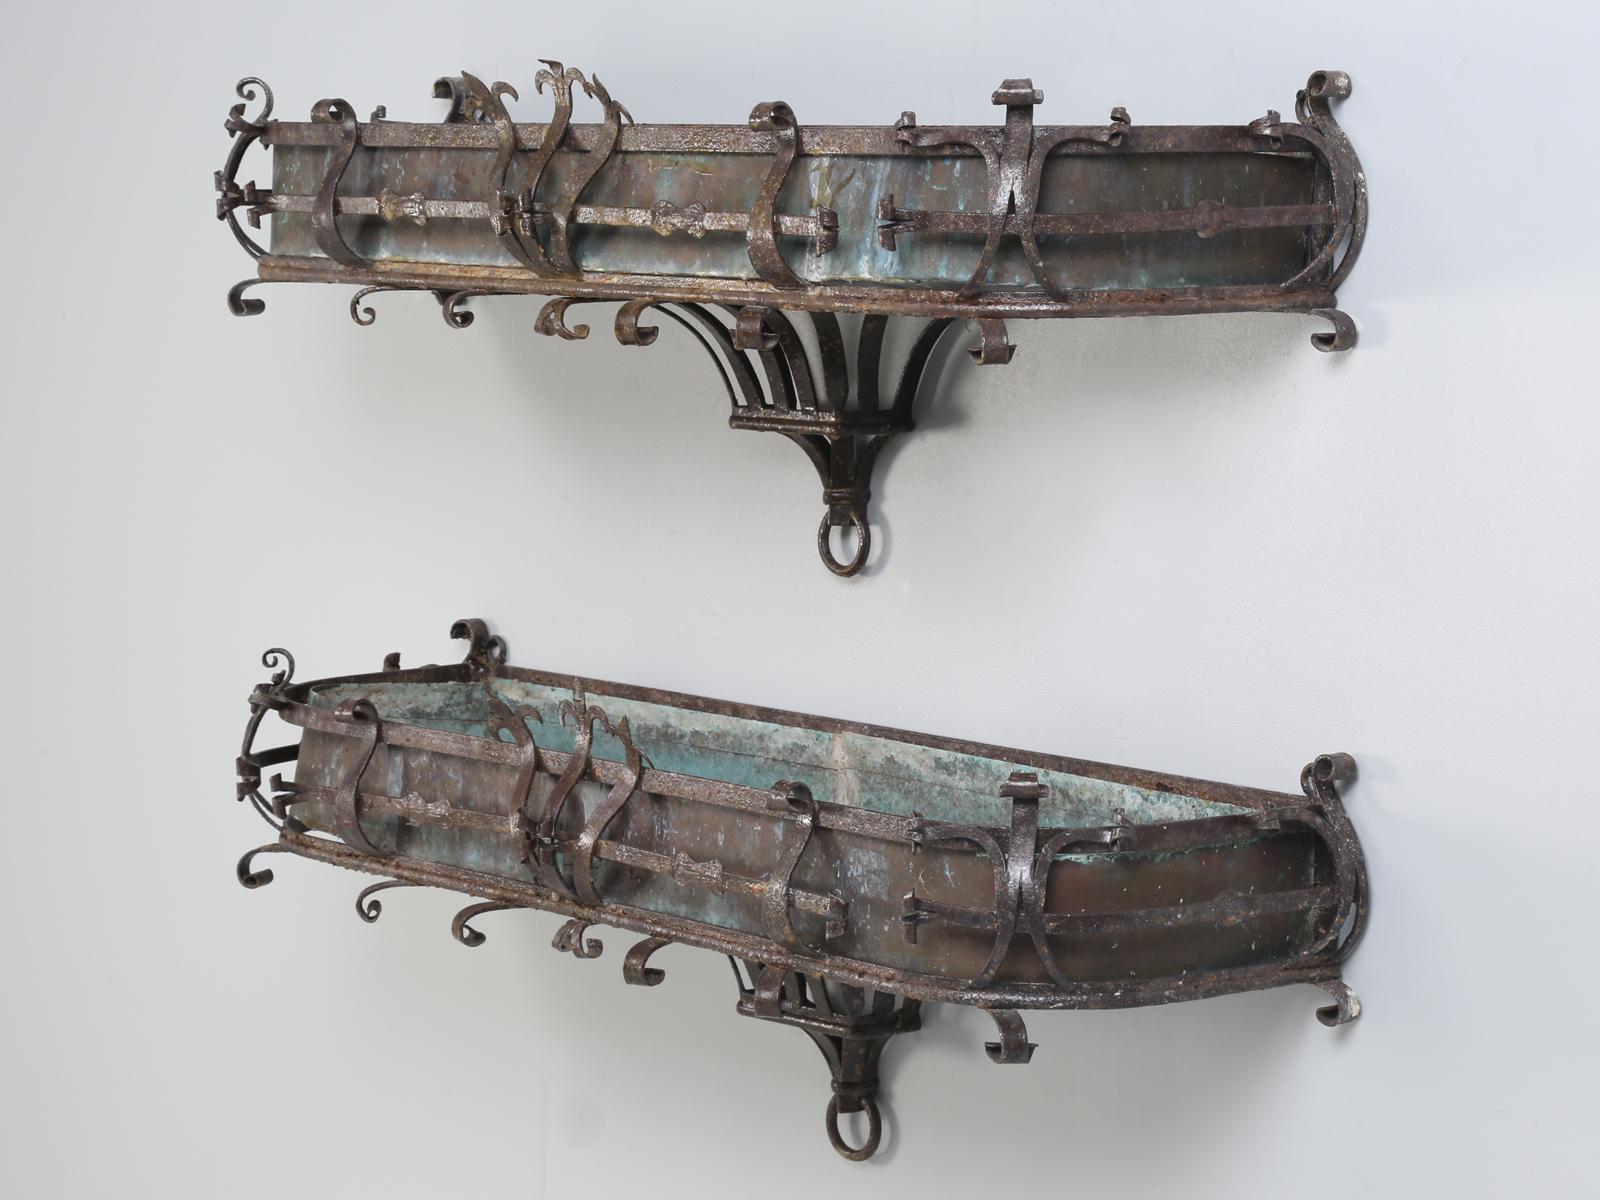 Antique Italian window boxes (pair) made of copper and hand formed metal. They are very unusual and are the only exceptional antique window boxes we have ever had for sale. To find a pair of antique Italian window boxes, this great looking is almost